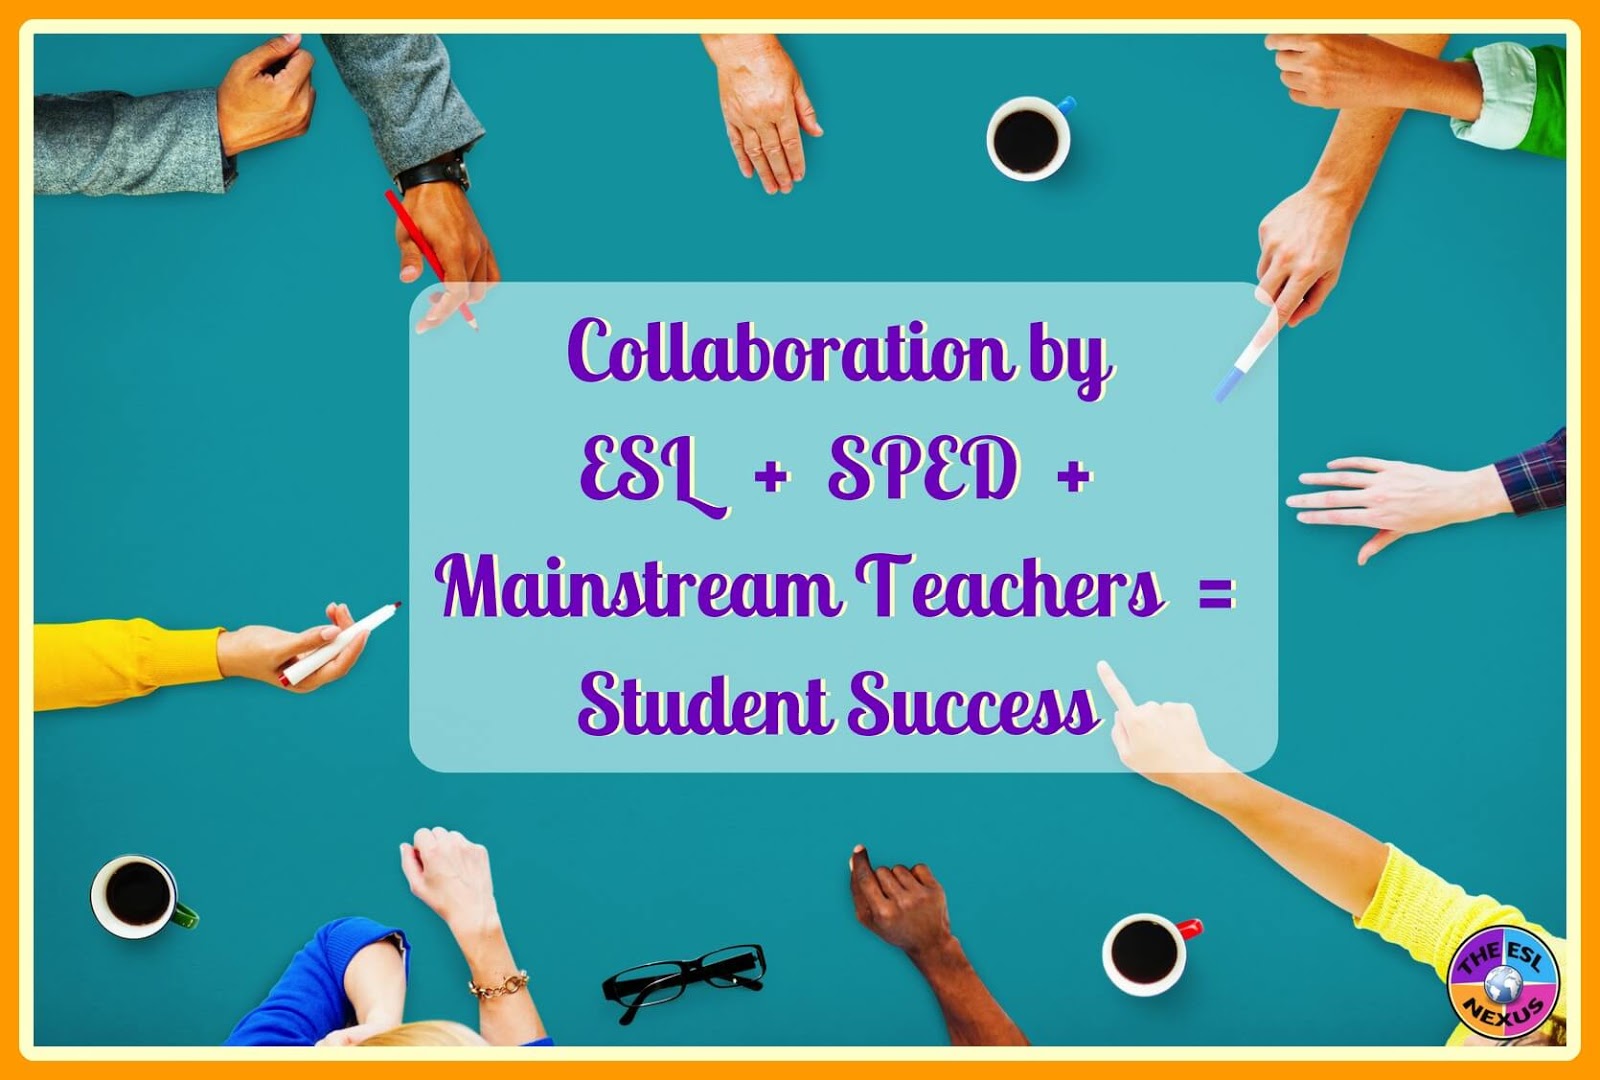 Teamwork among teachers fosters success in students. Join the #ELLEdTech Twitter chat on 8/20/17 for ideas on how to facilitate collaboration between ESL, SPED & mainstream teachers | The ESL Nexus